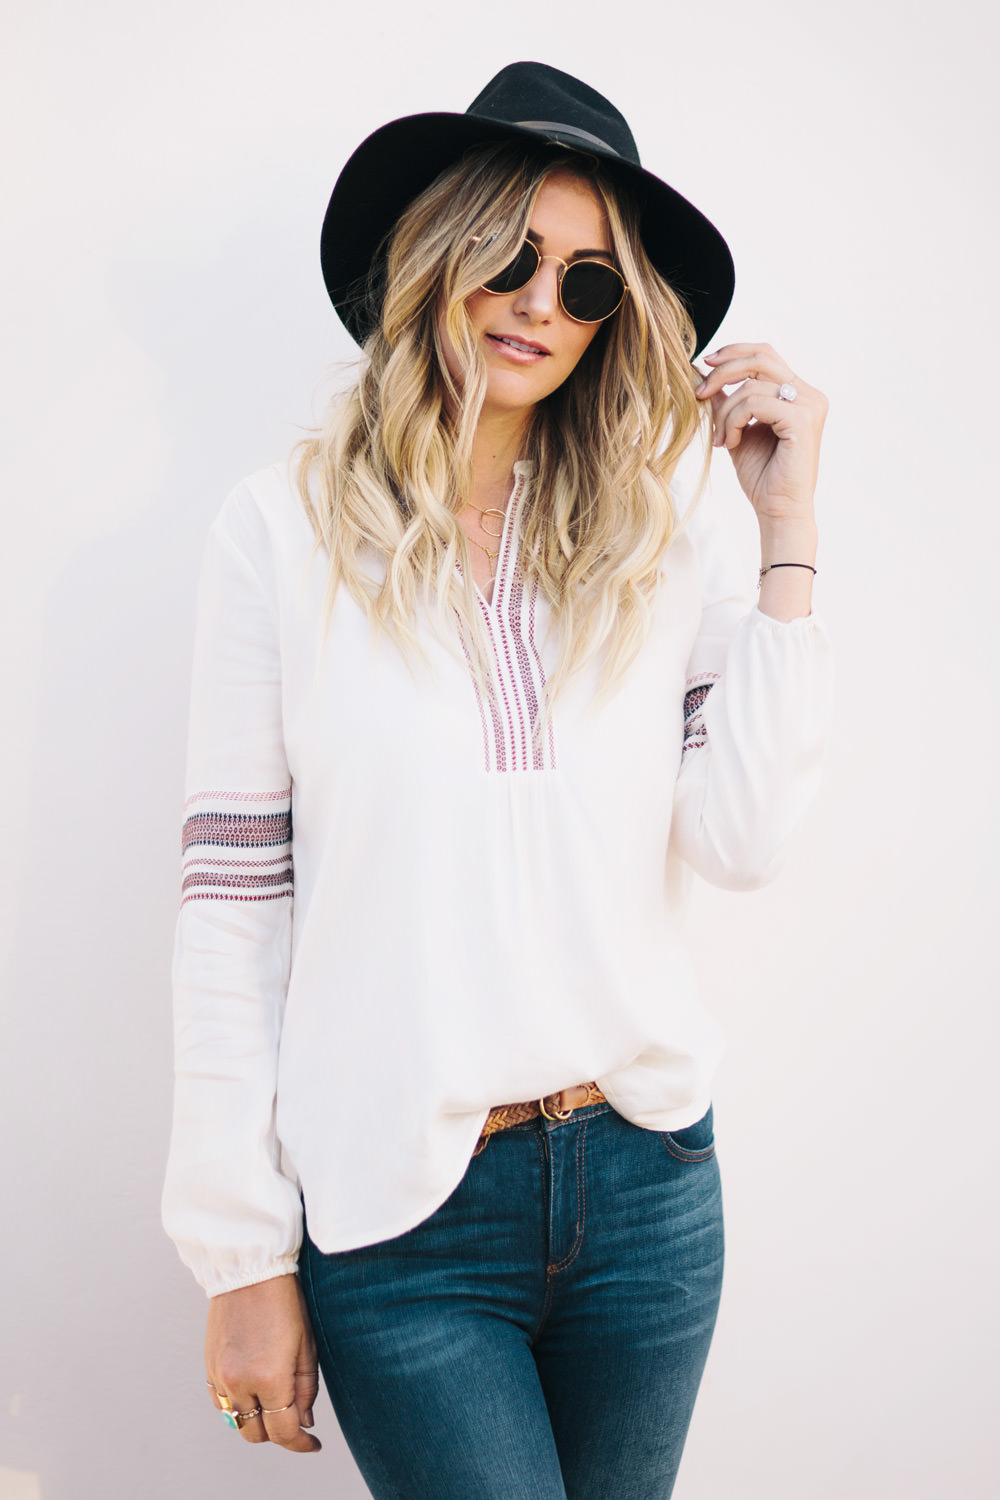 Caitlin Lindquist of the fashion blog Dash of Darling shares an easy weekend boho outfit from Loft